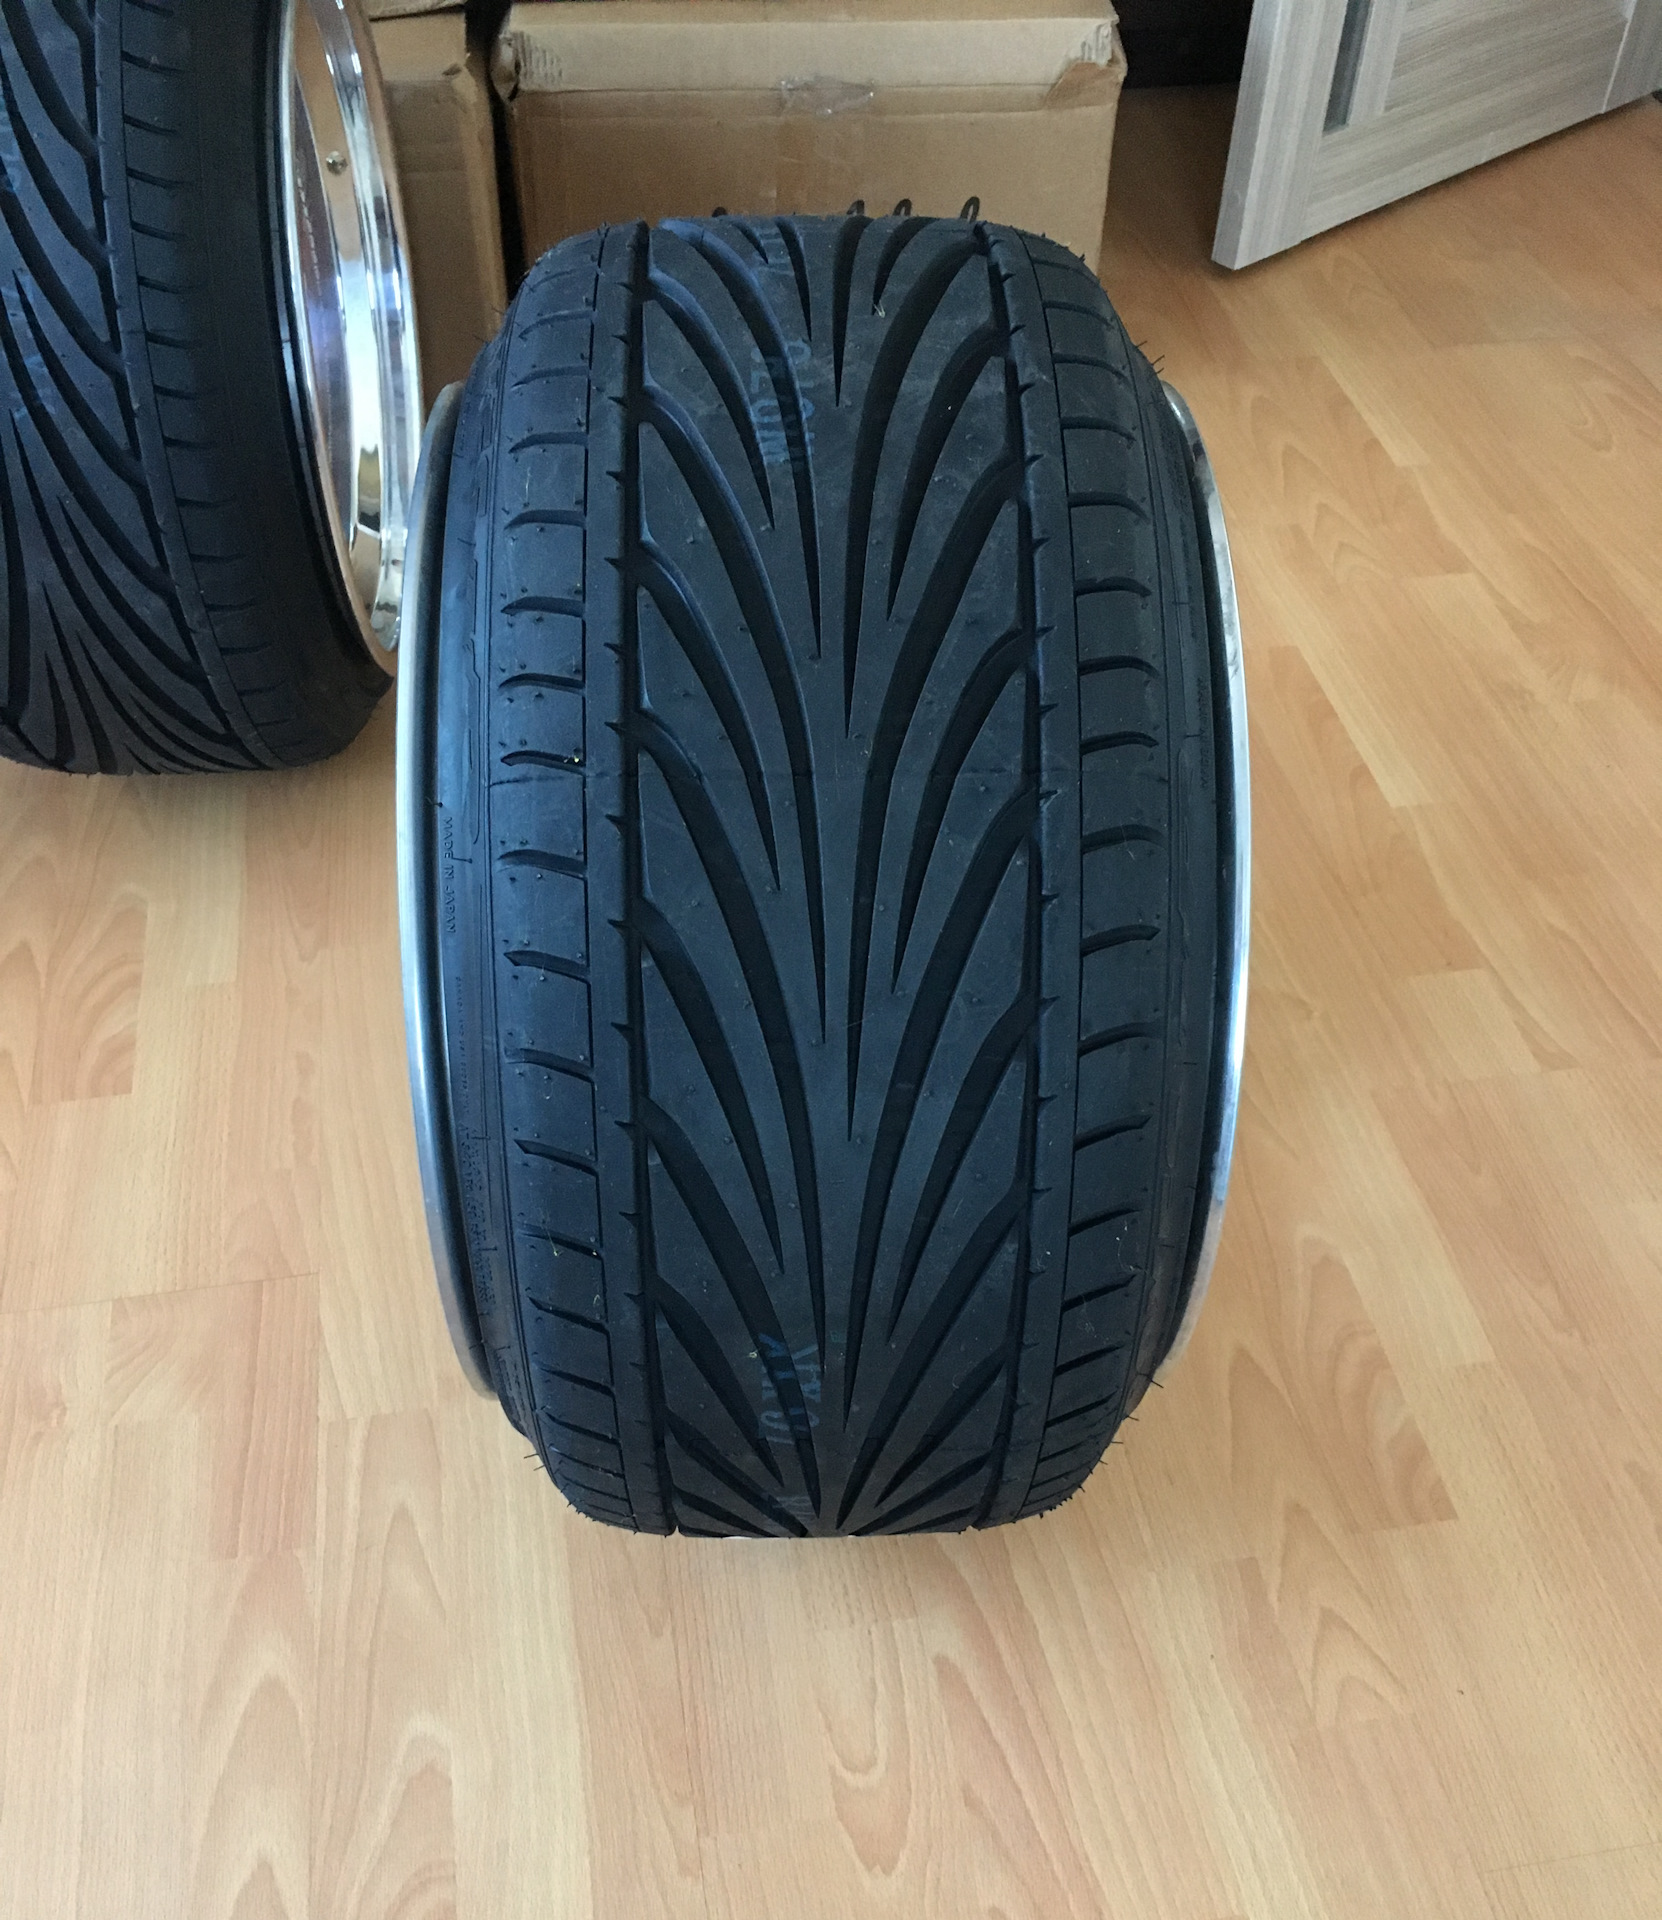 Toyo proxes sport r18. Toyo PROXES t1r. Тойо 888 255 35 18. Toyo t1r Sport. Toyo PROXES t1r Sport.